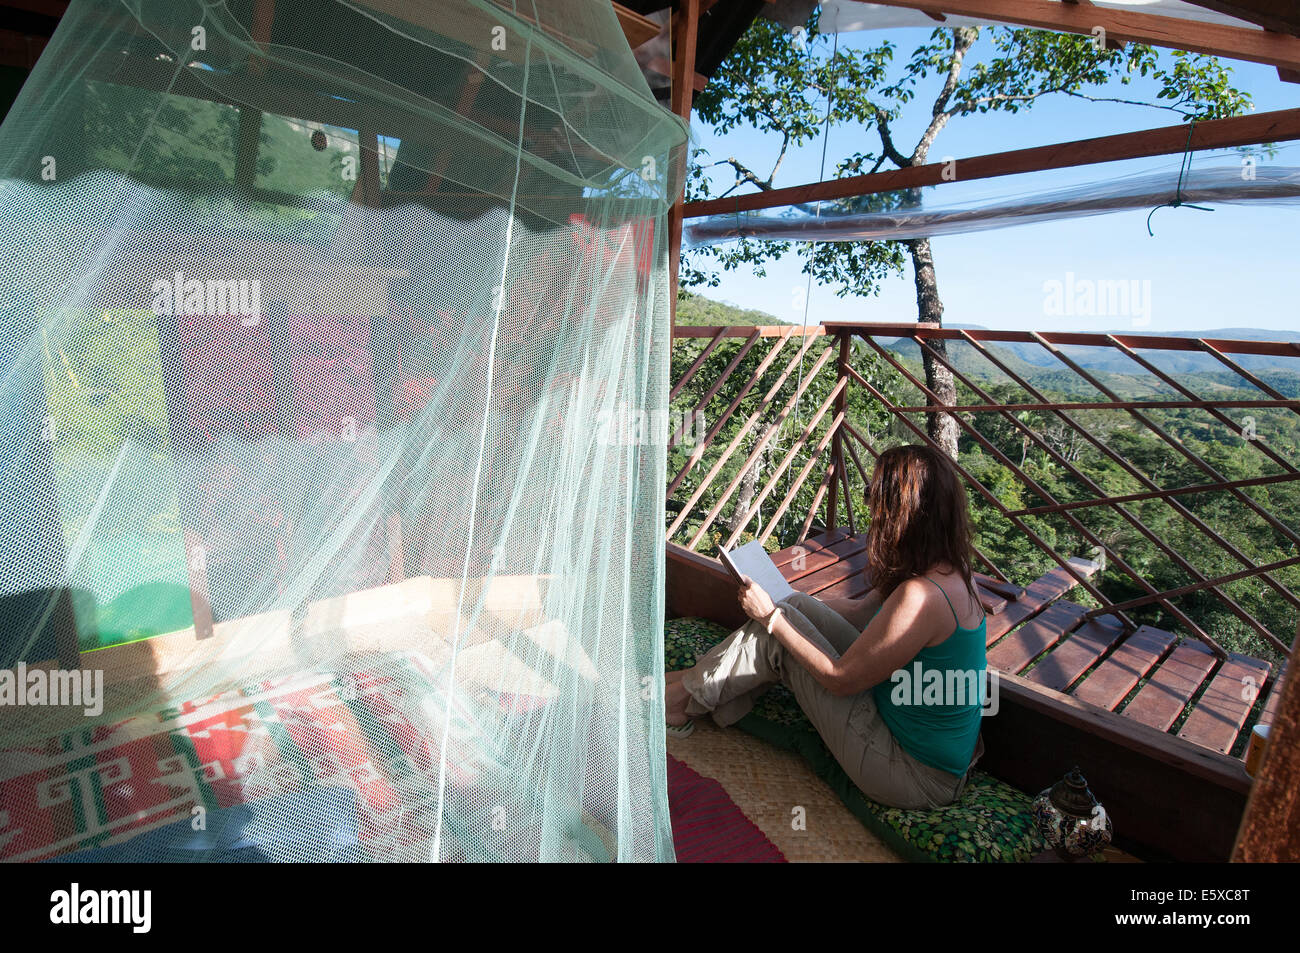 Woman reading in treehouse Goiás state Brazil Stock Photo